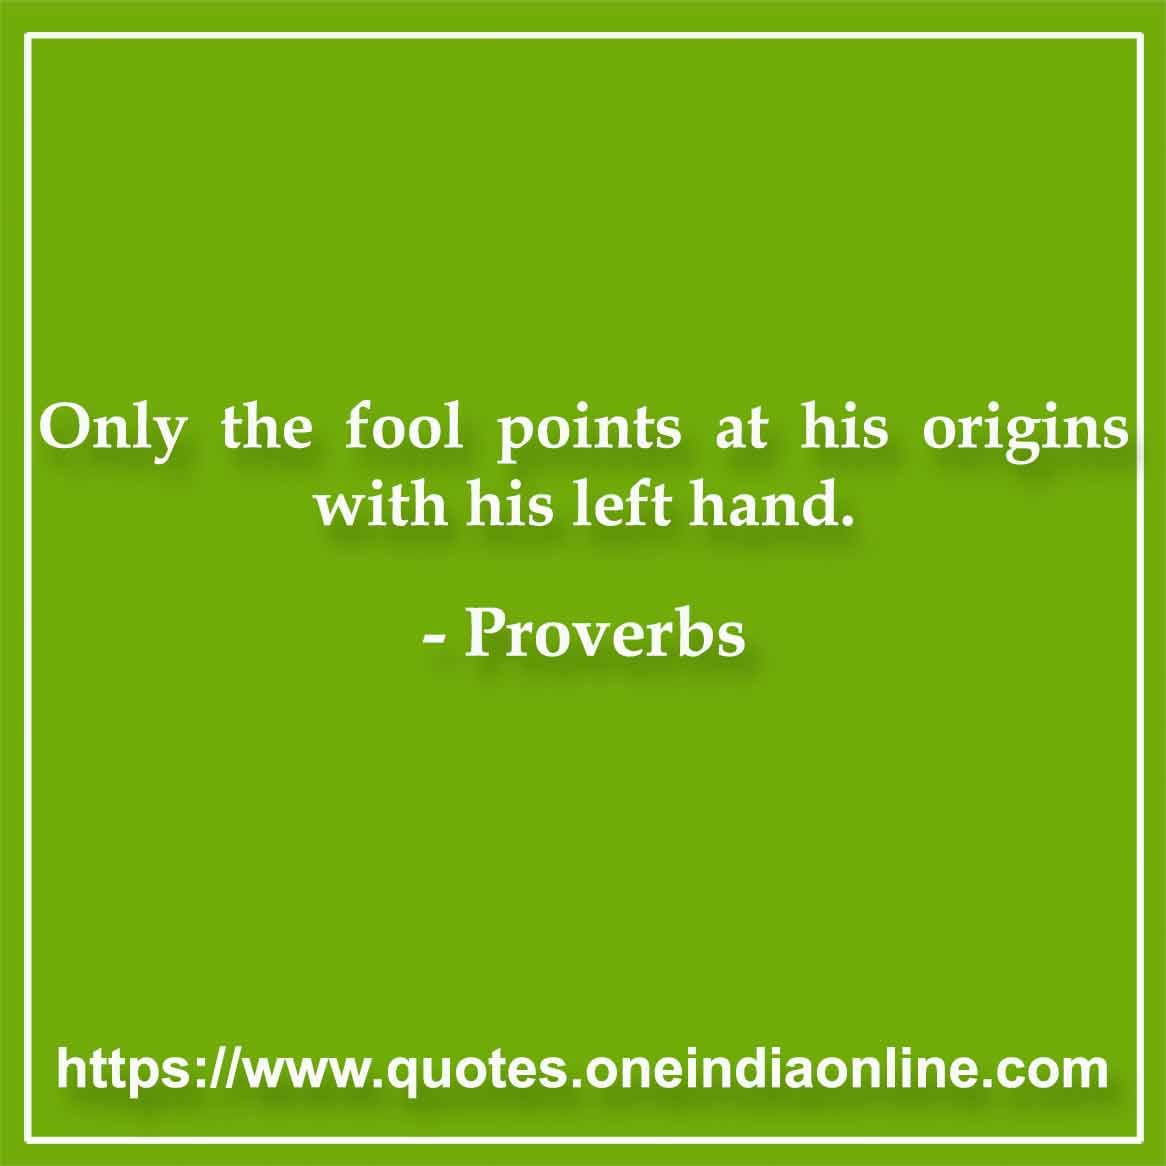 Only the fool points at his origins with his left hand.